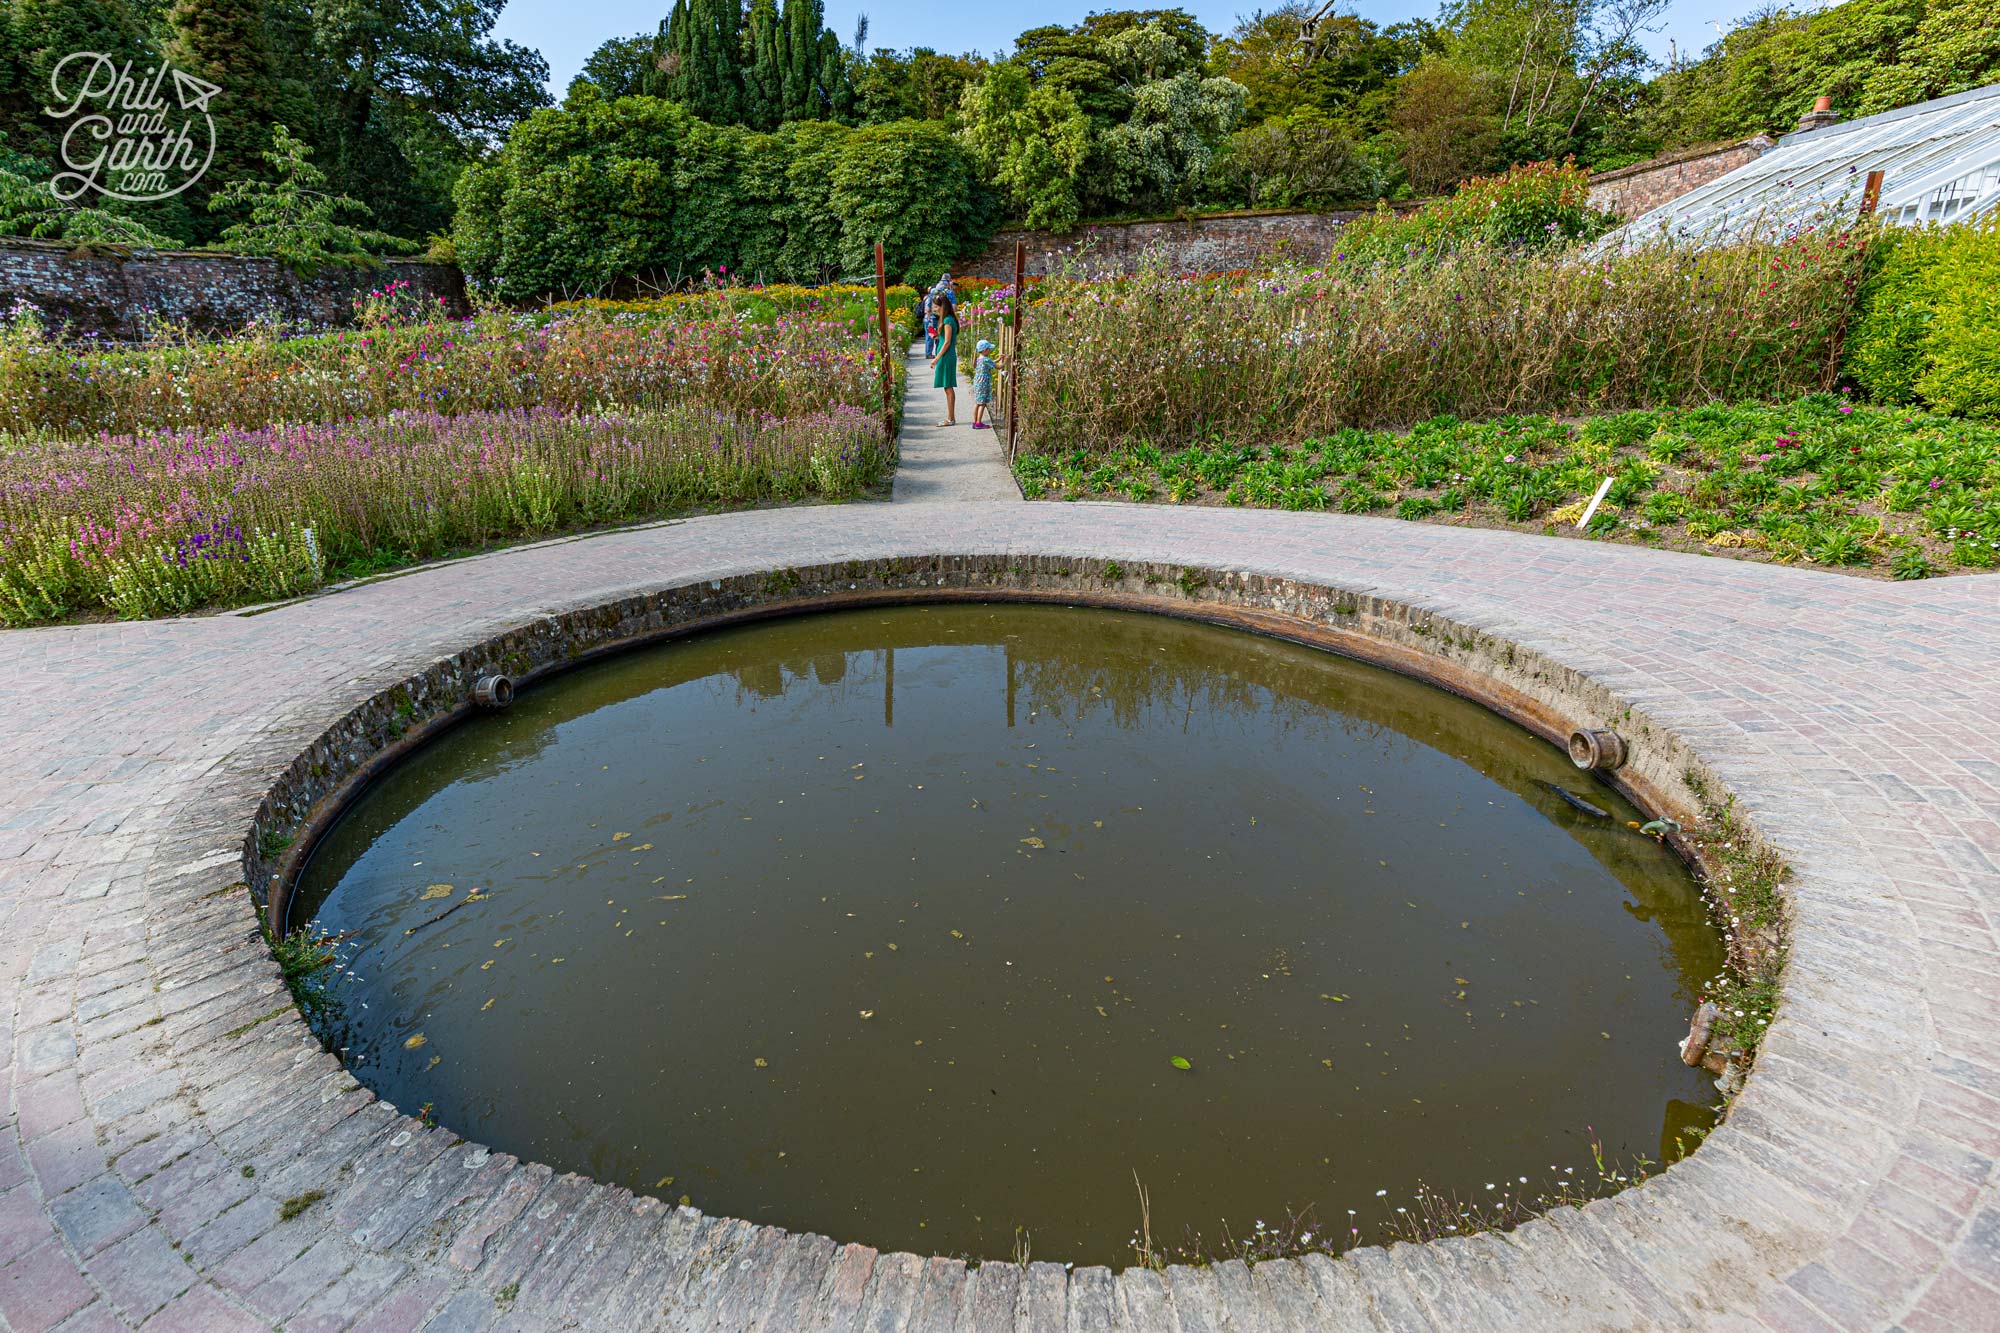 The Dipping Pond was used by staff to collect water in watering cans to feed the flowers and plants